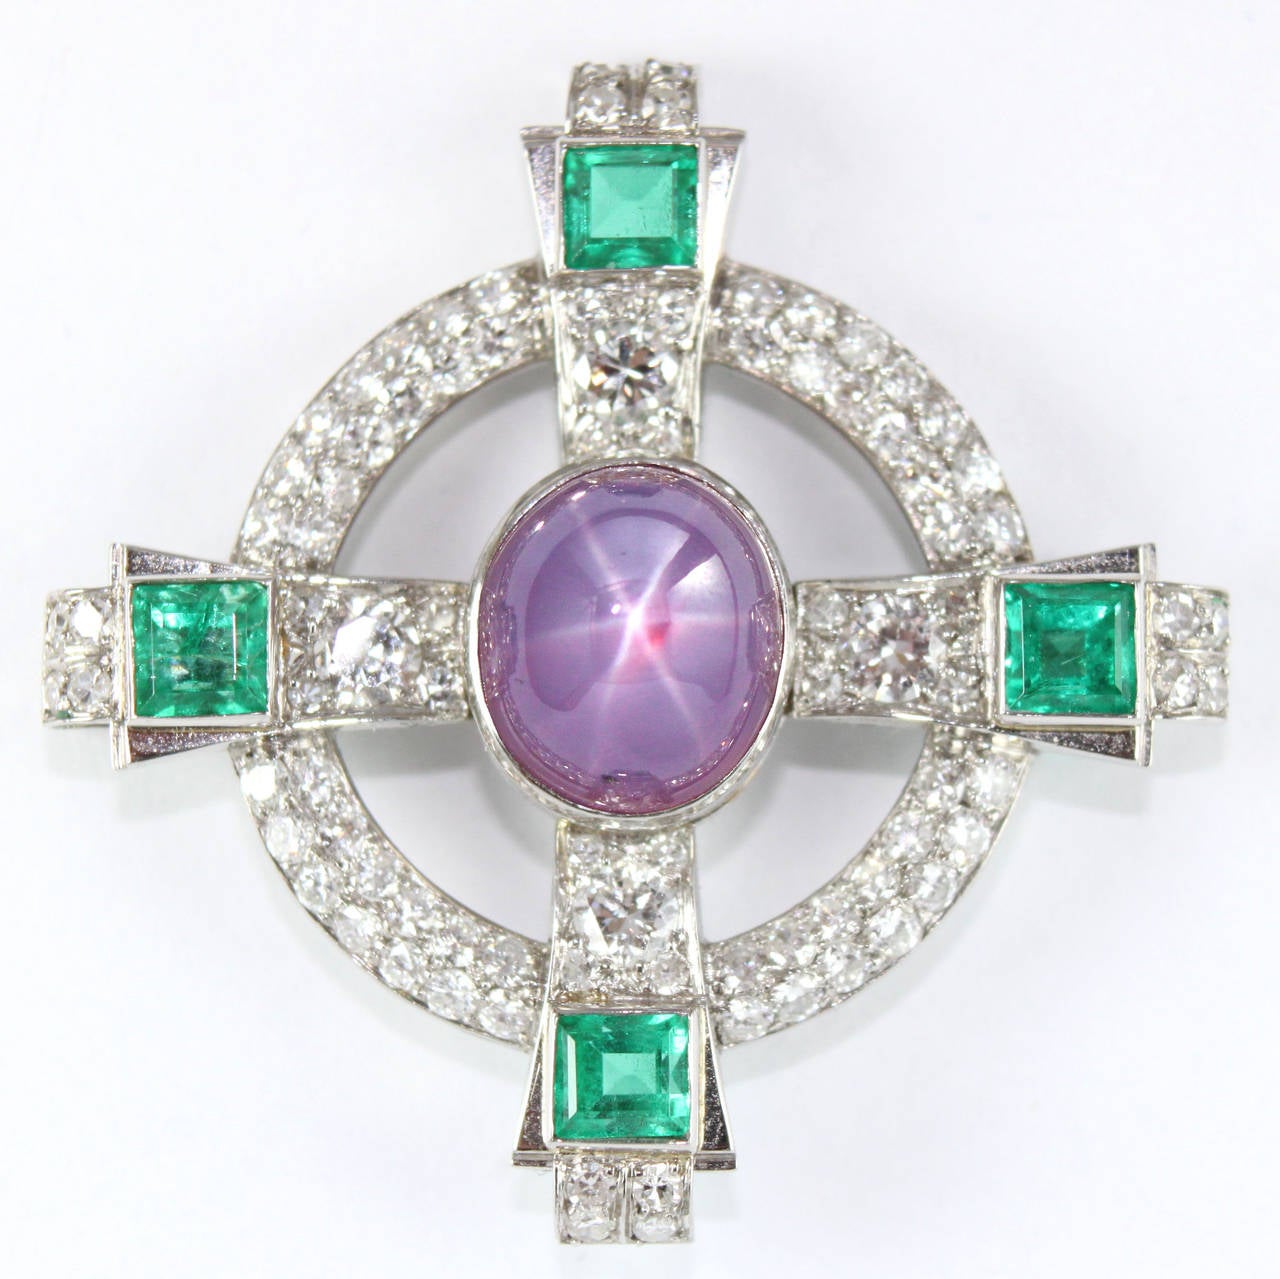 A beautiful Celtic Cross brooch in platinum with a rare purple star sapphire in the centre that is accentuated by diamonds and 4 square cut emeralds. 

The sapphire has a perfect 6-ray star in the middle of the stone (it is a very strong and sharp